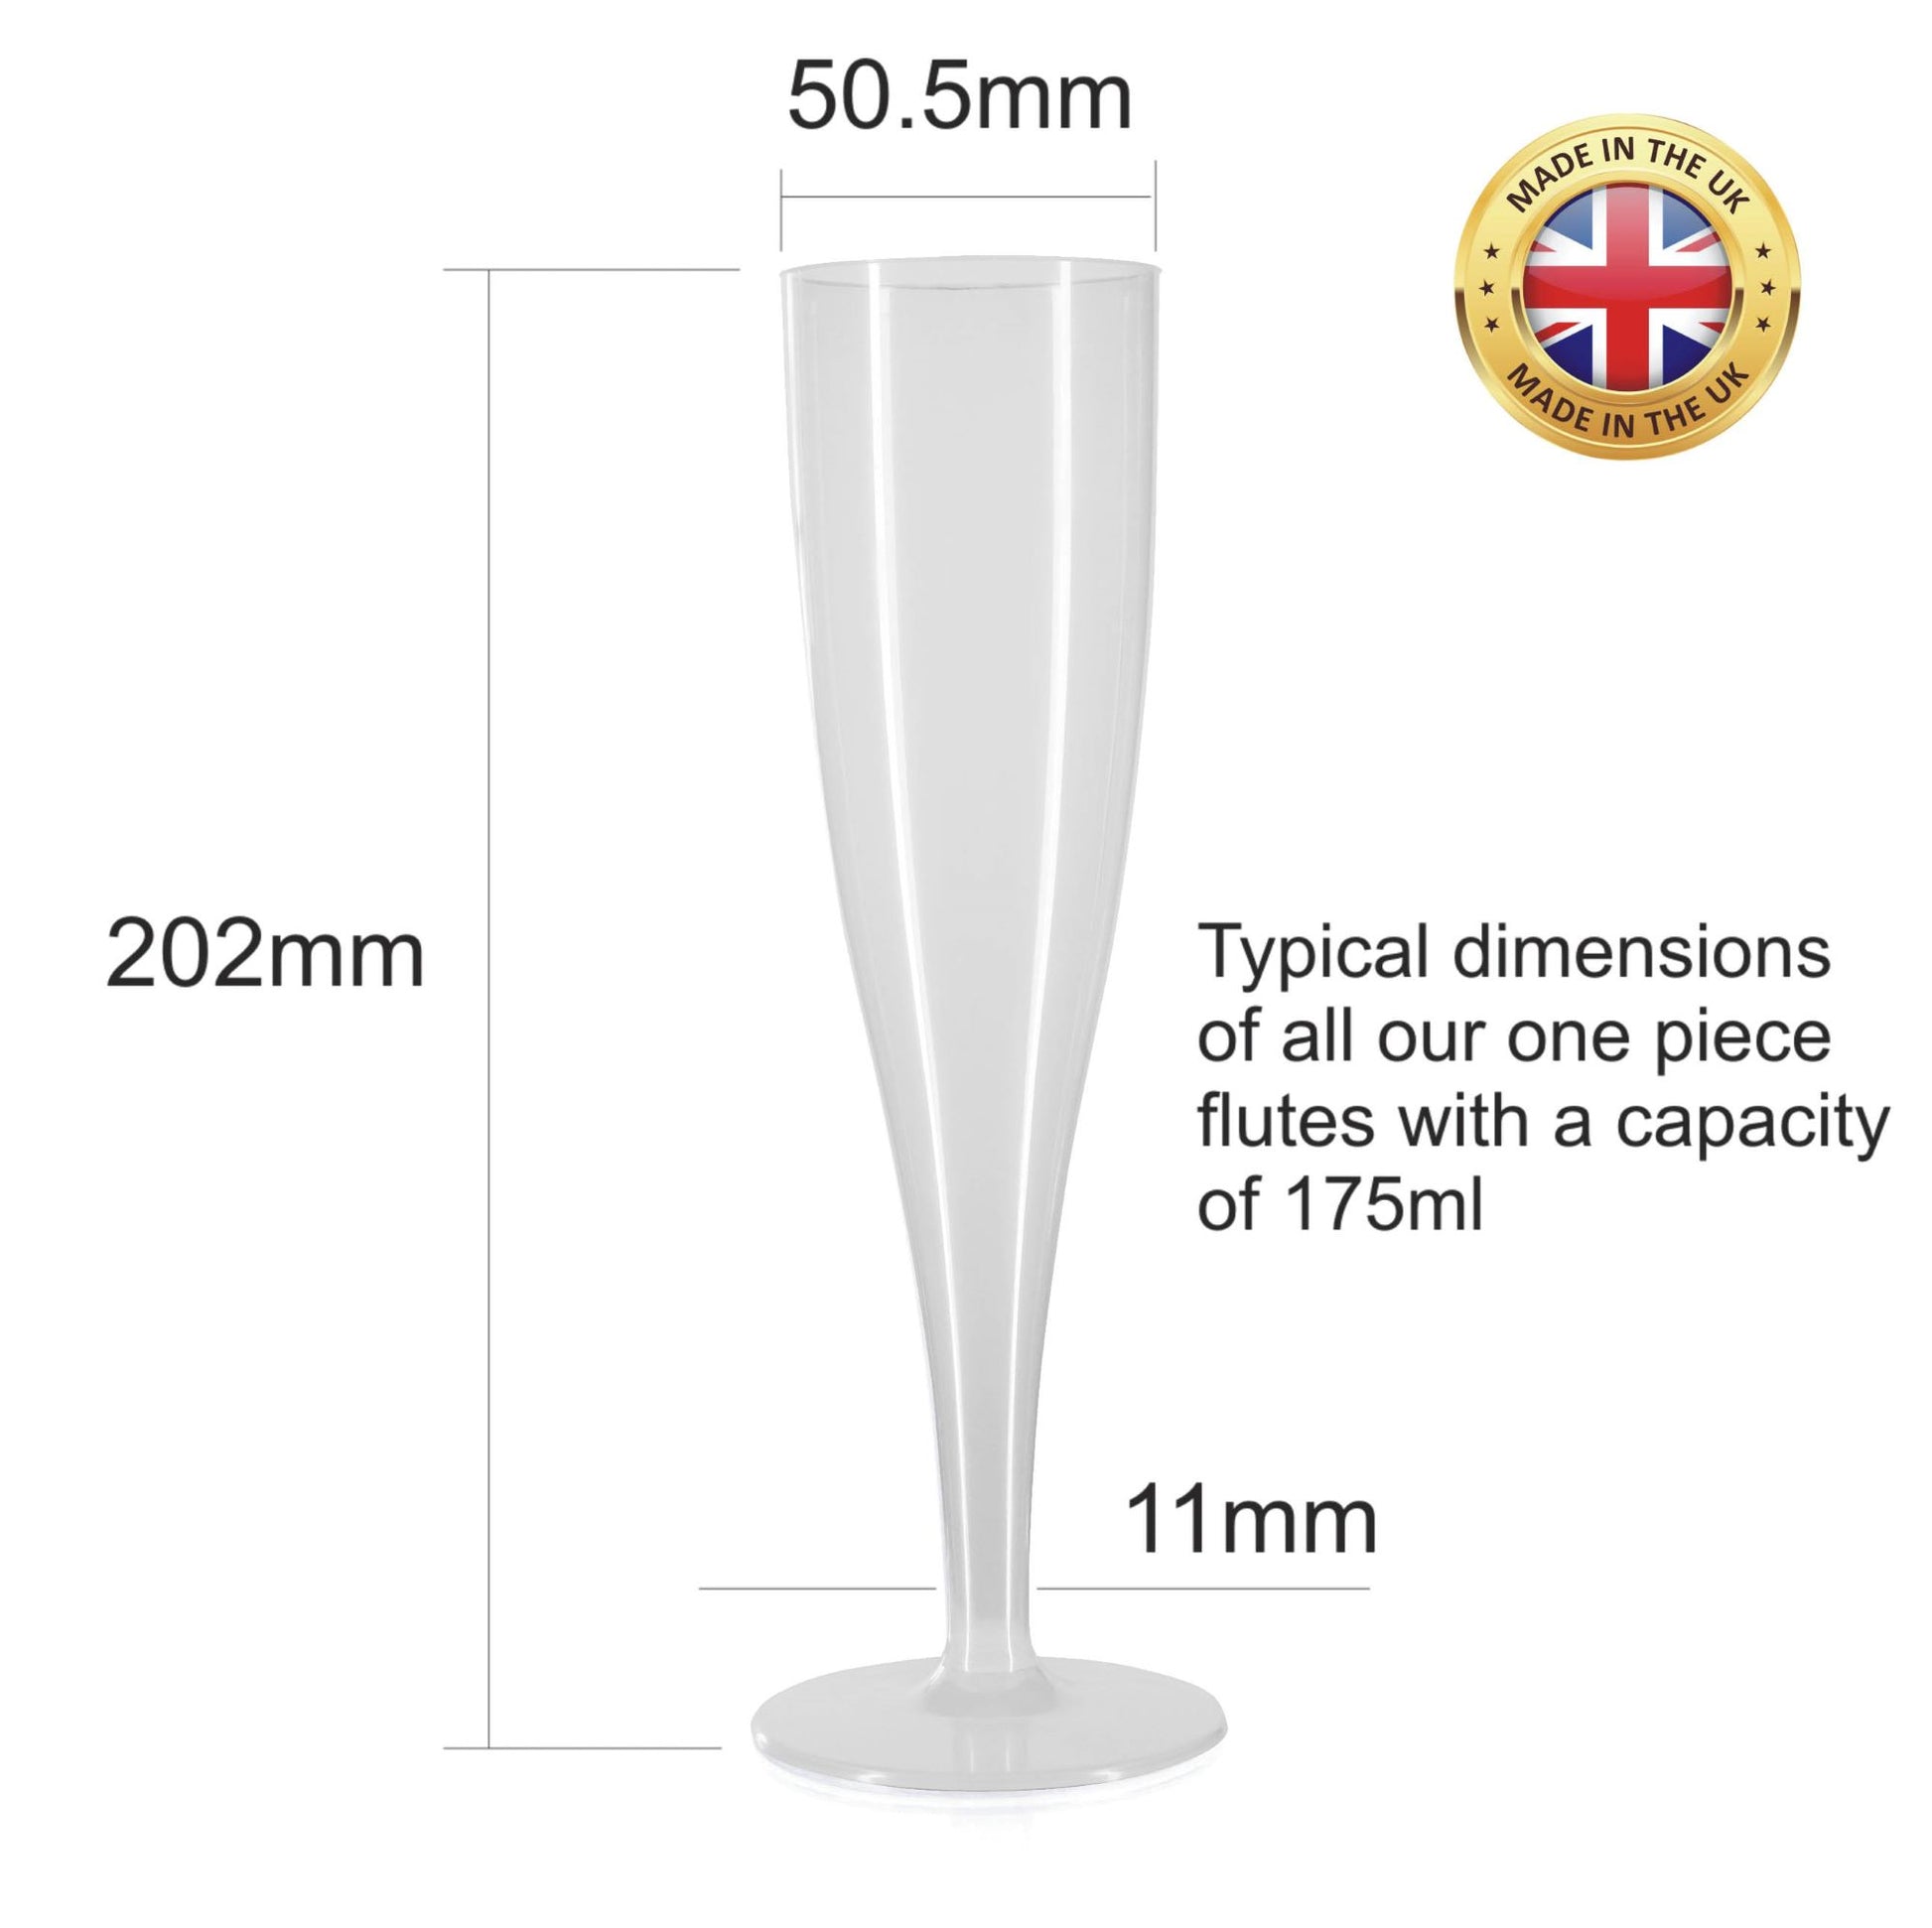 10 x Biodegradable Prosecco Flutes Colourless Material Clear 1-Piece Champagne Glass (Pack of 10 Glasses) Garden, BBQ, Wedding, Picnic-5056020180067-PCUP-CHAMPBIOCLEAR-Product Pro-BBQ, Biodegradable, Champagne Flutes, Champagne Glasses, Clear Champagne Glasses, Clear Prosecco Flutes, Flutes, Garden, Picnic, Prosecco Flutes, Prosecco Glasses, Transparent, Wedding